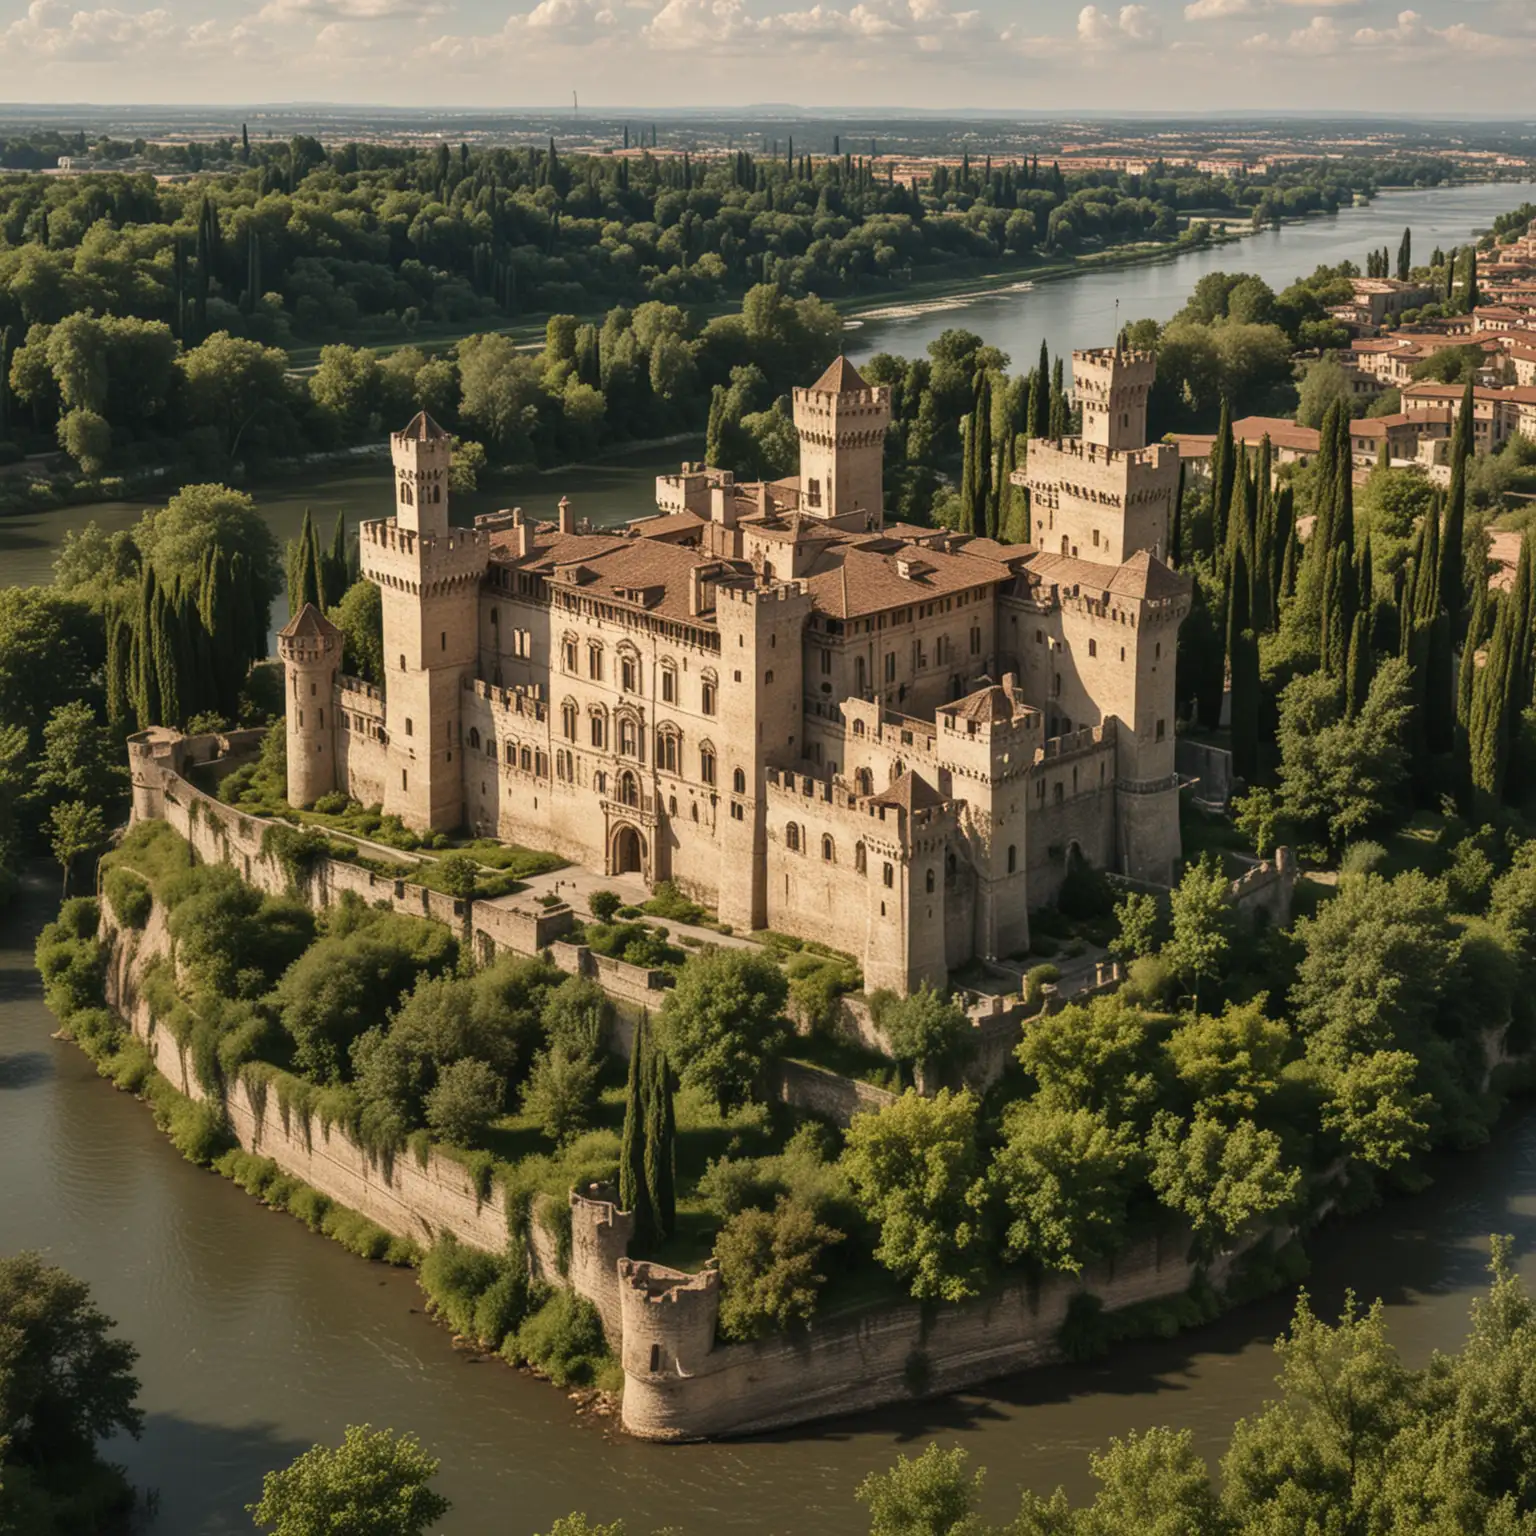 italian castle on riverside, palace at center, large towers, trees and bushes